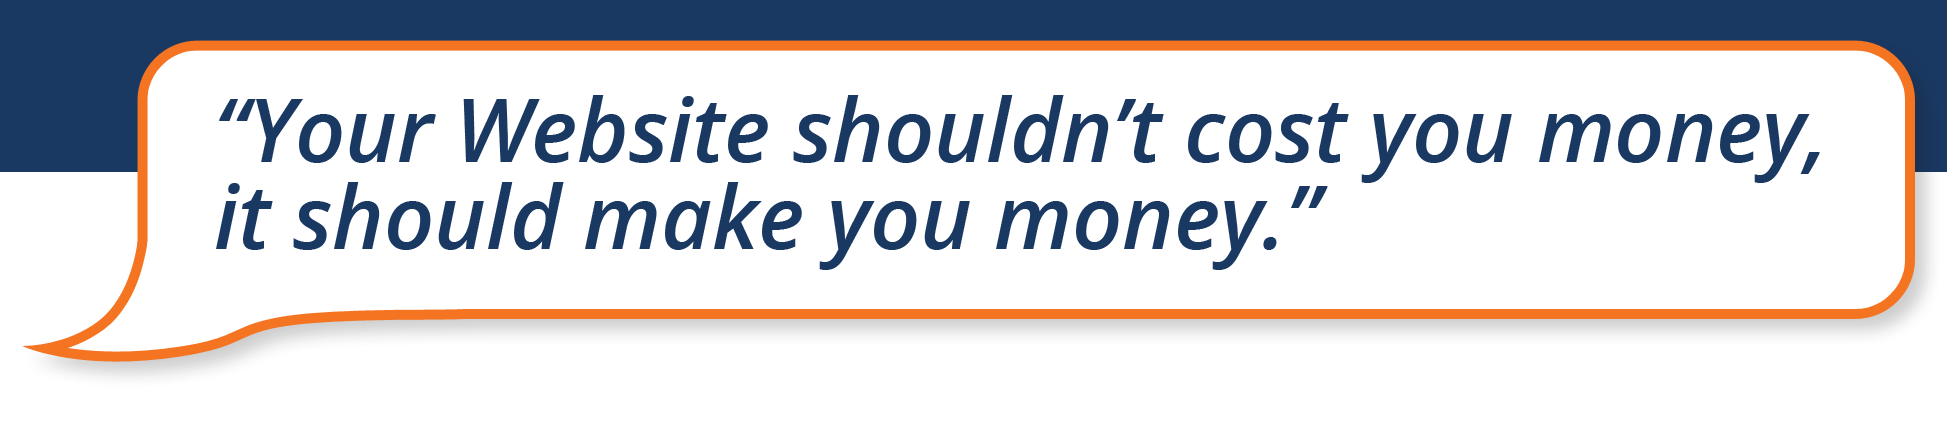 "Your Website shouldn't cost you money, it should make you money" speech bubble with blue background